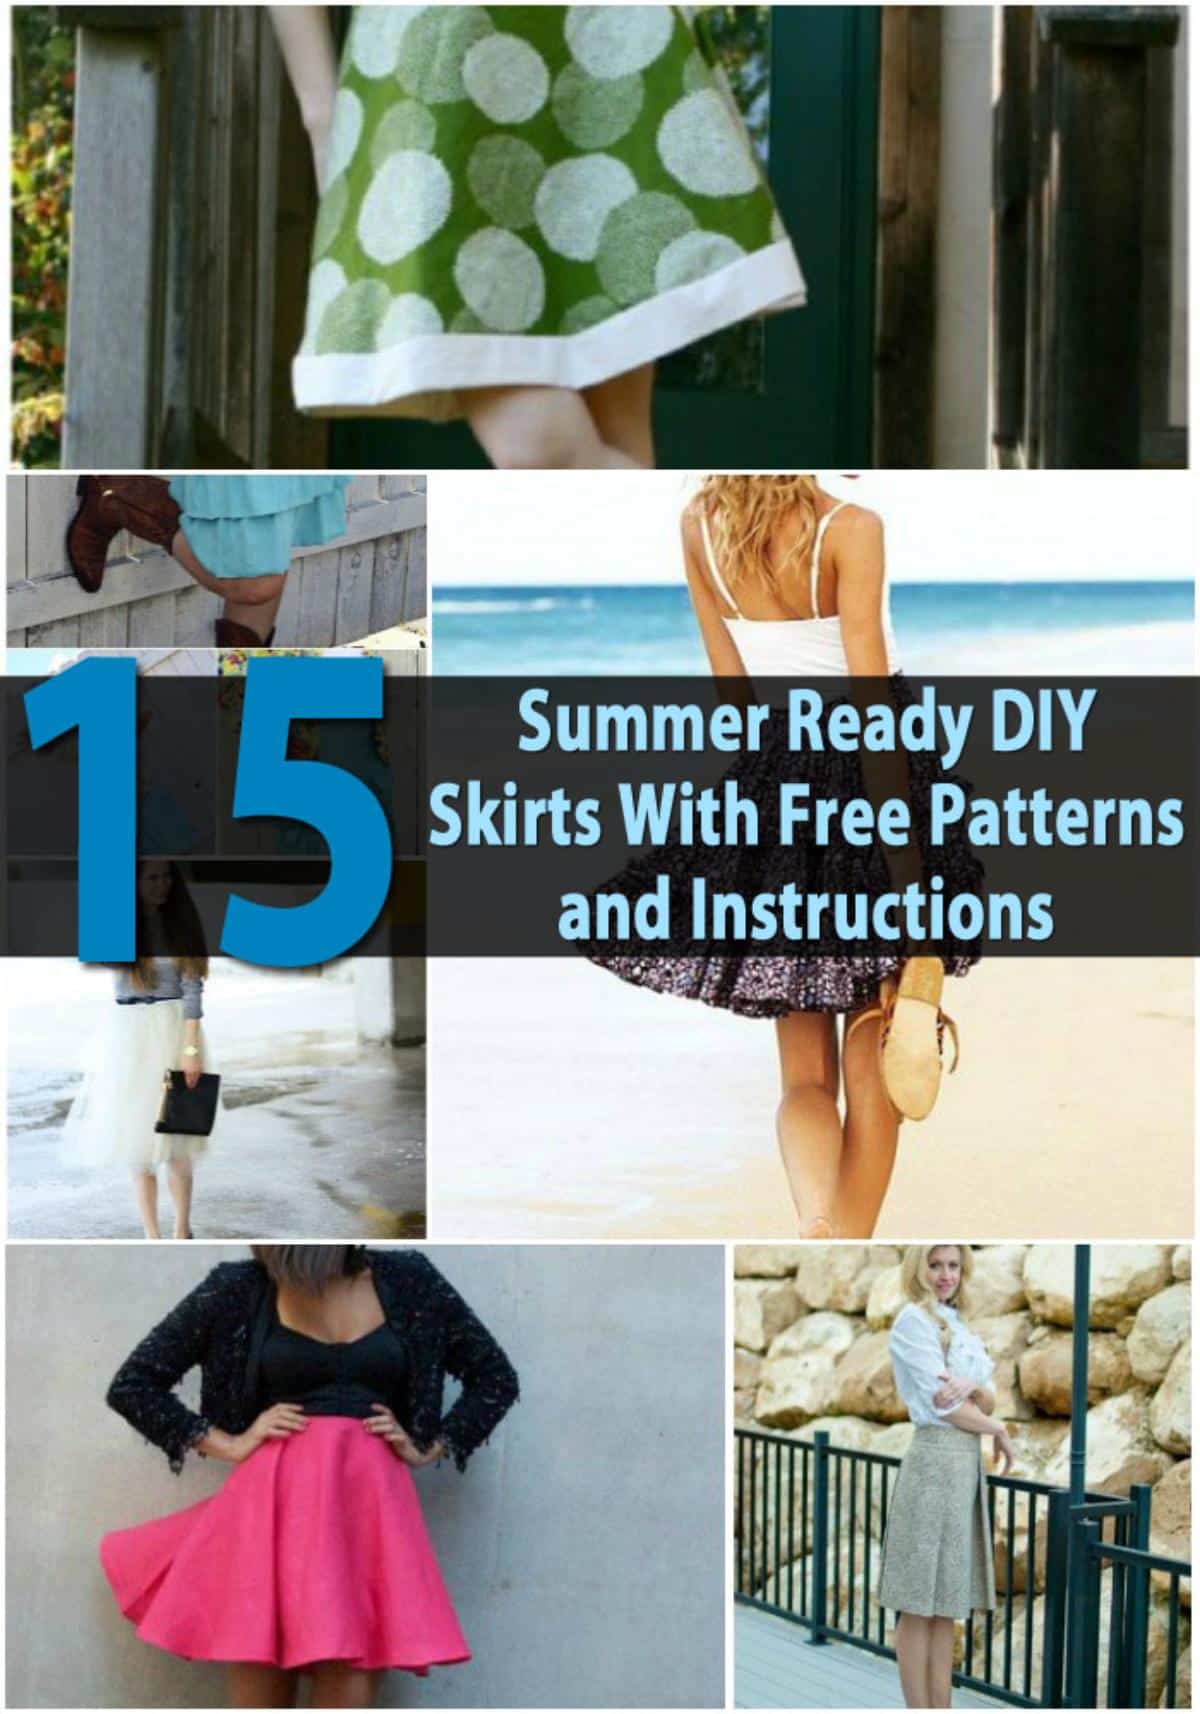 Top 15 Summer Ready DIY Skirts With Free Patterns and Instructions pinterest image.